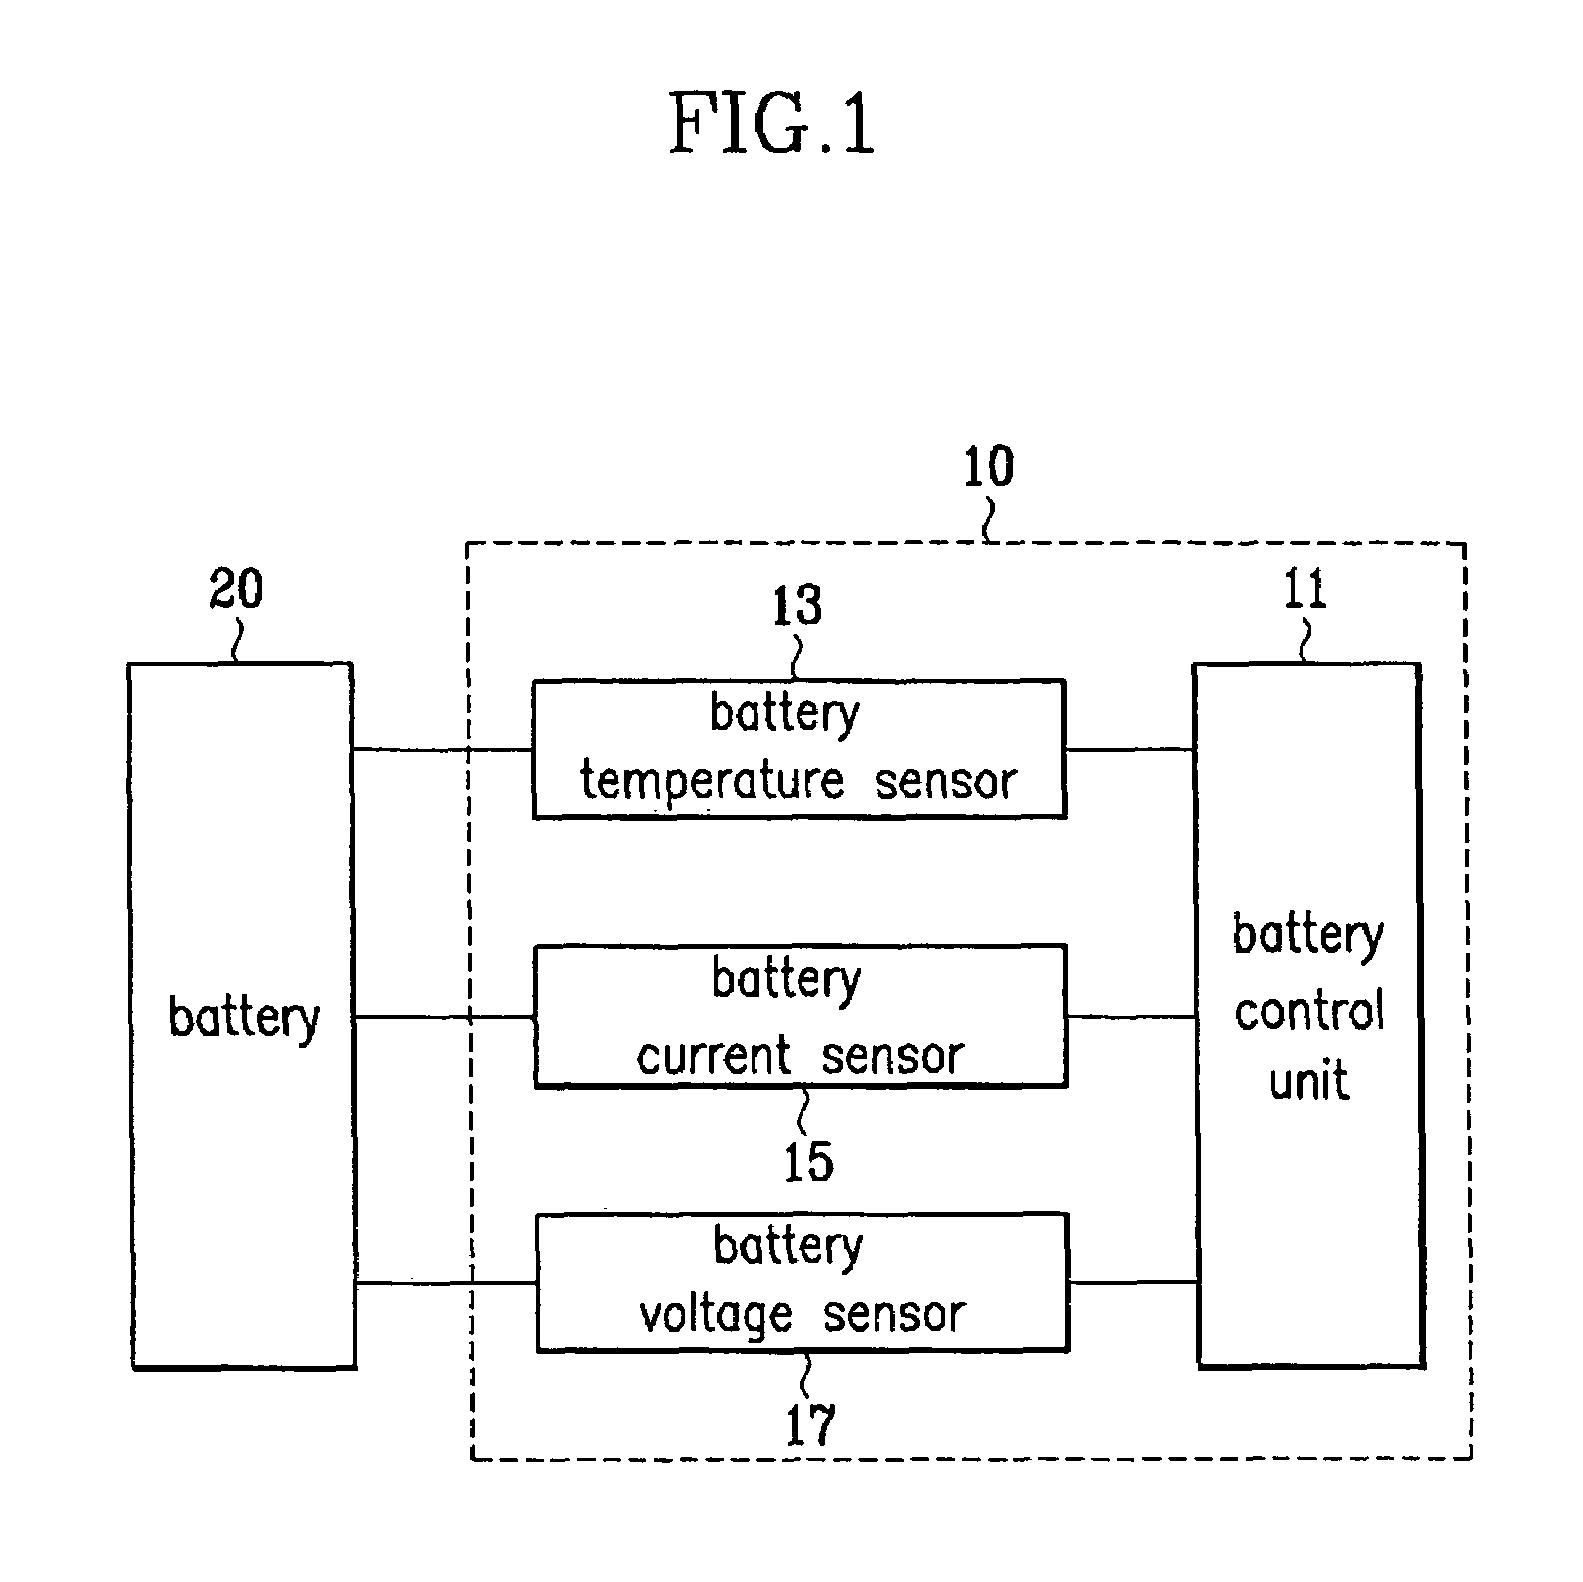 Method and system for calculating available power of a battery